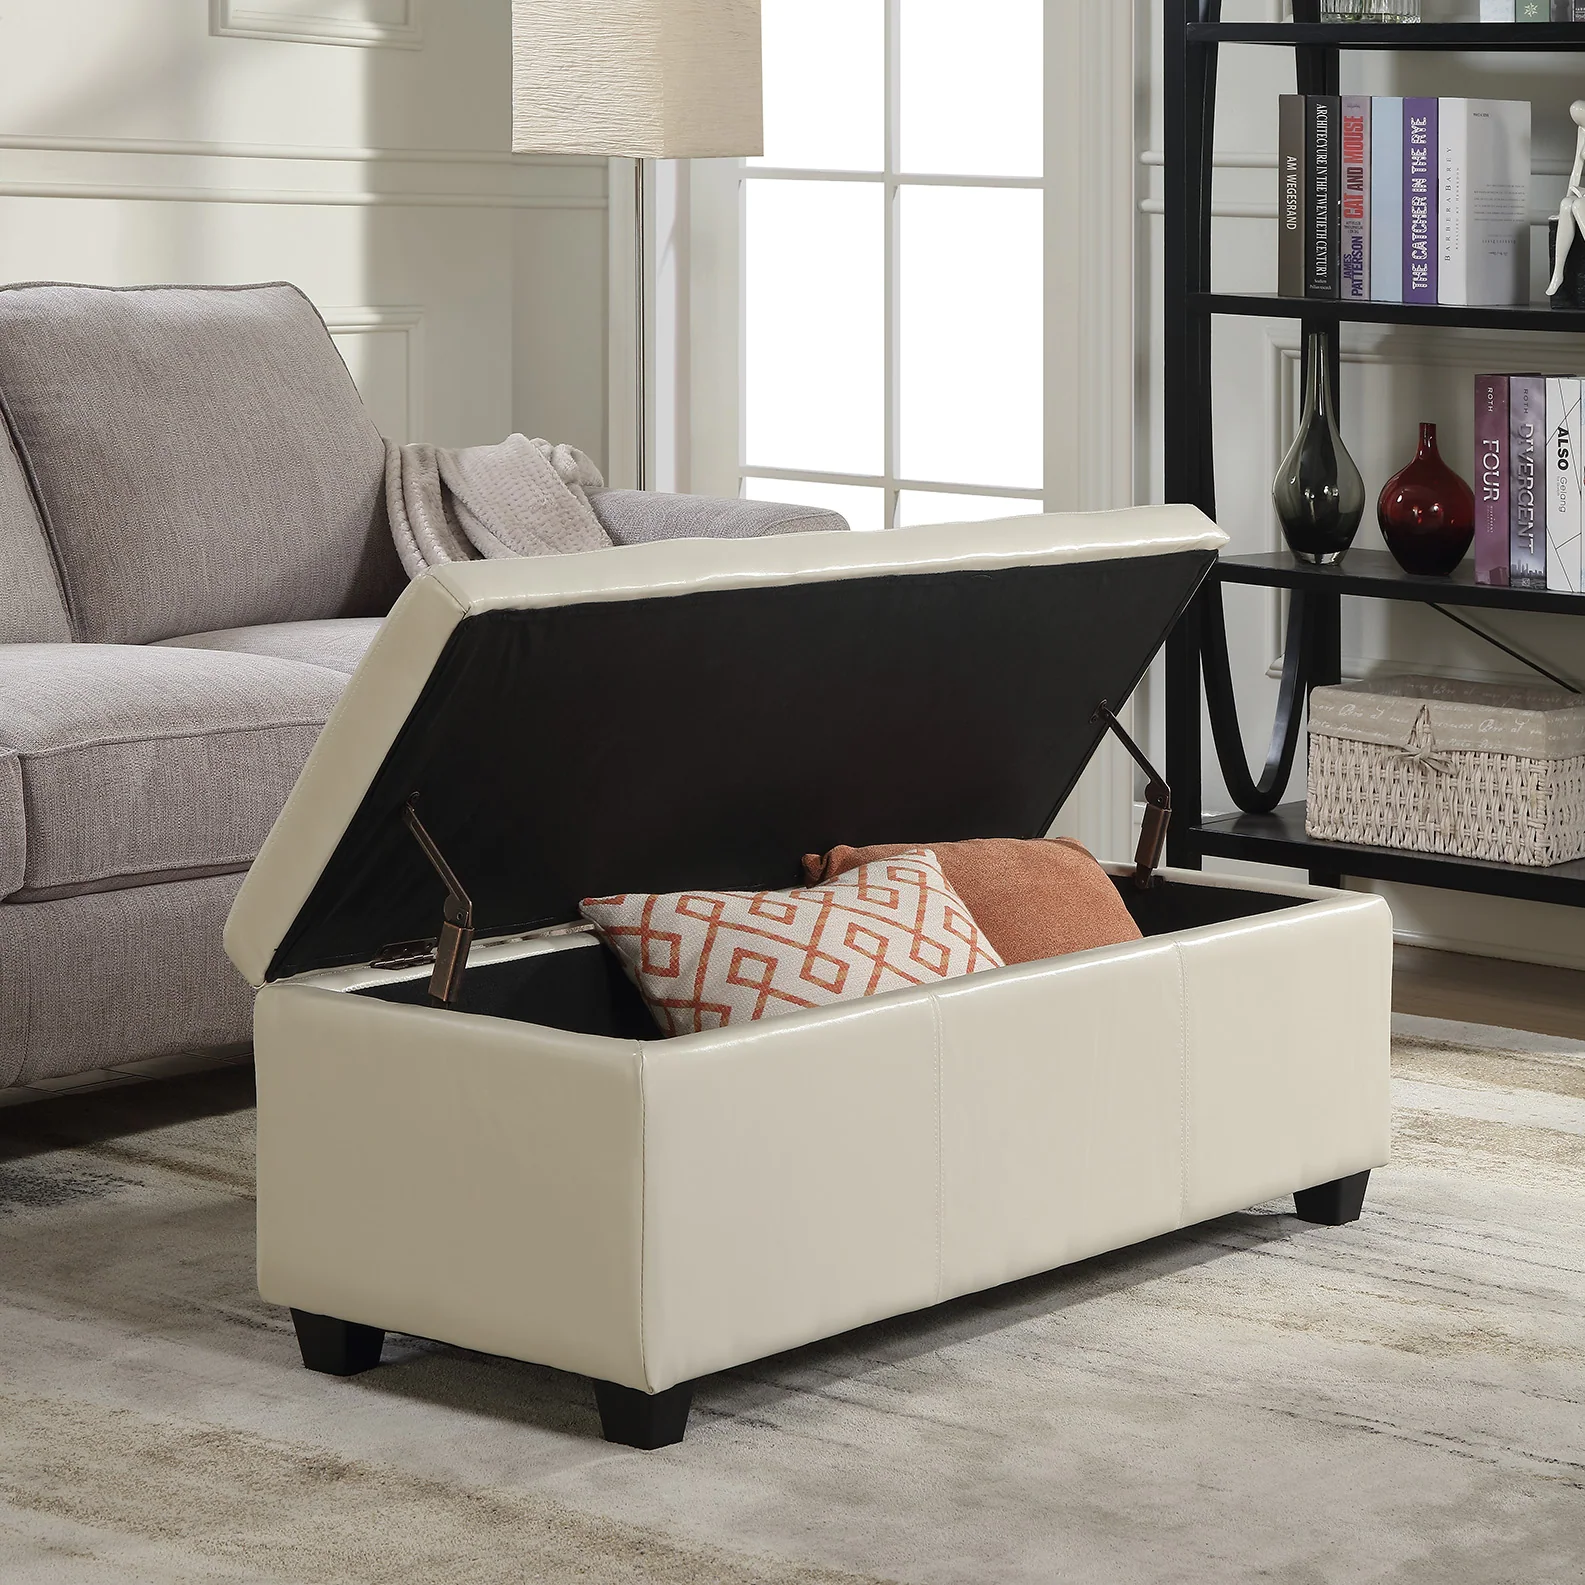 A storage ottoman solving storage needs in a living room.